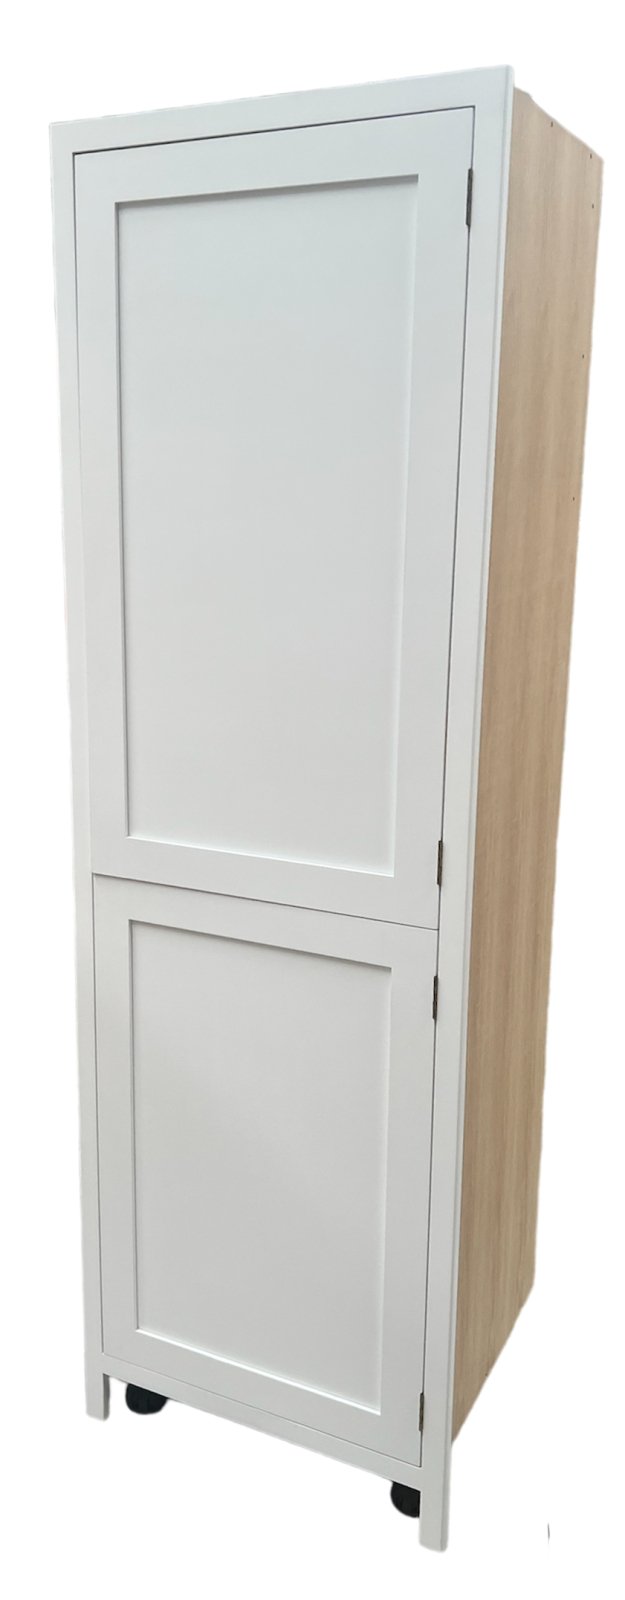 TFF 50/50 - 680mm Wide Tall double door Fridge or Freezer housing - Classic Kitchens Direct